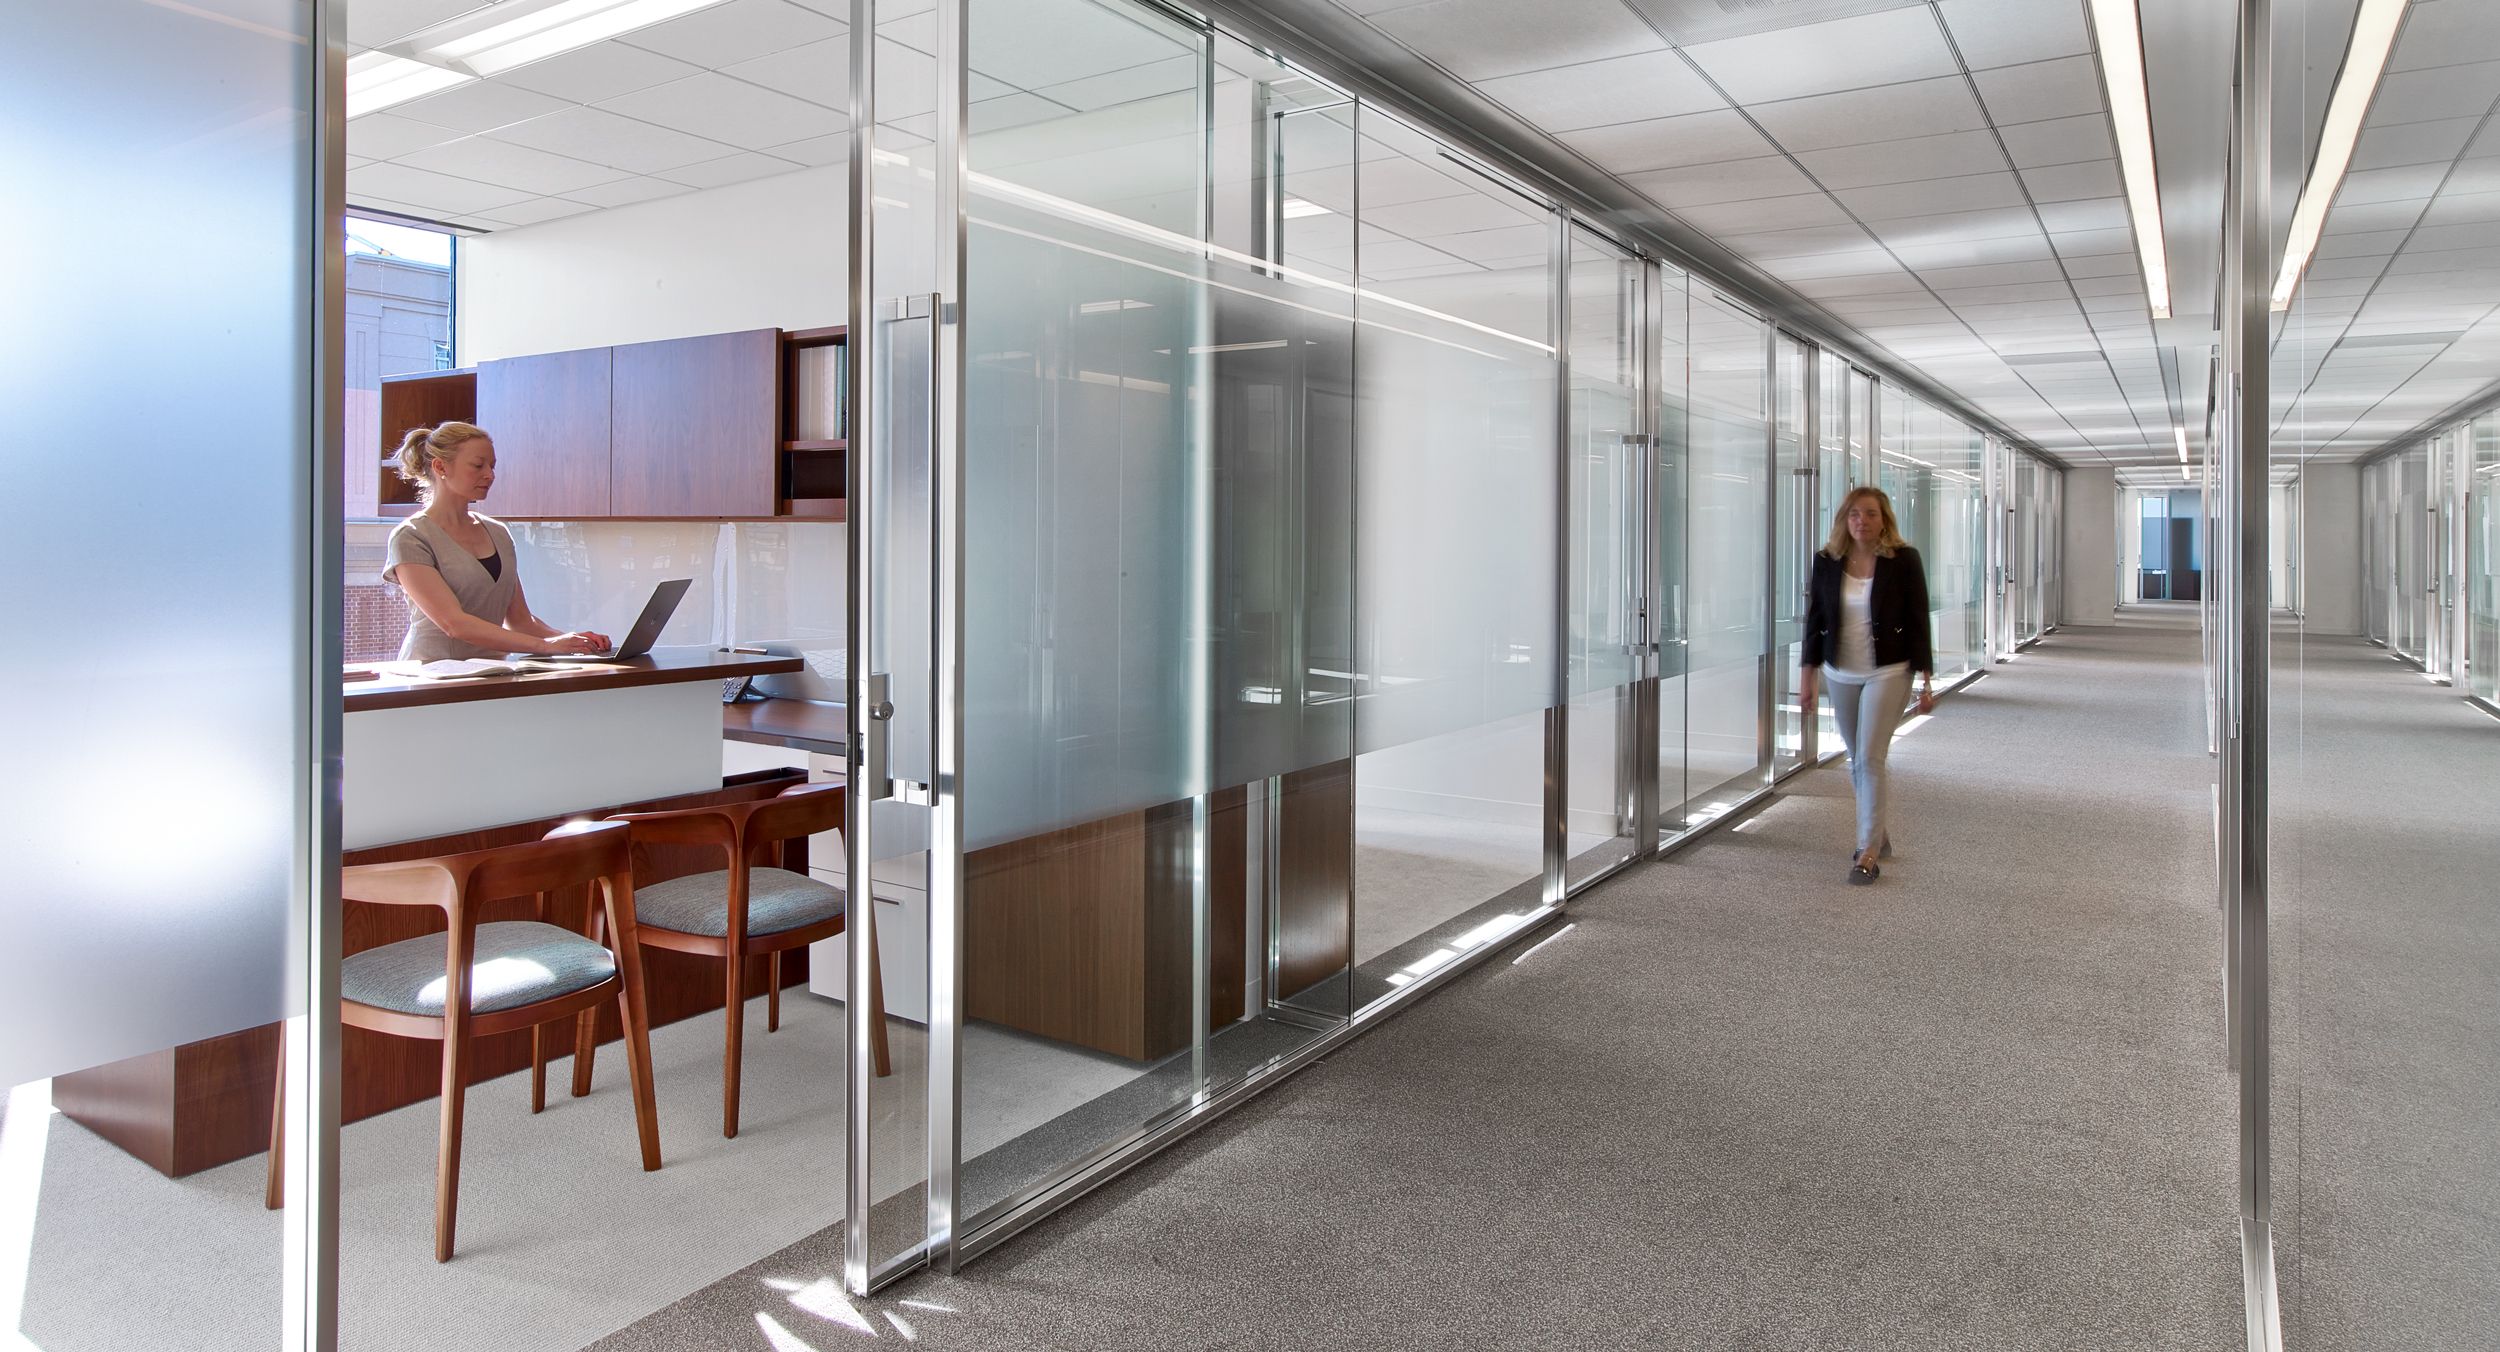 Associate offices feature integrated adjustable-height desking.